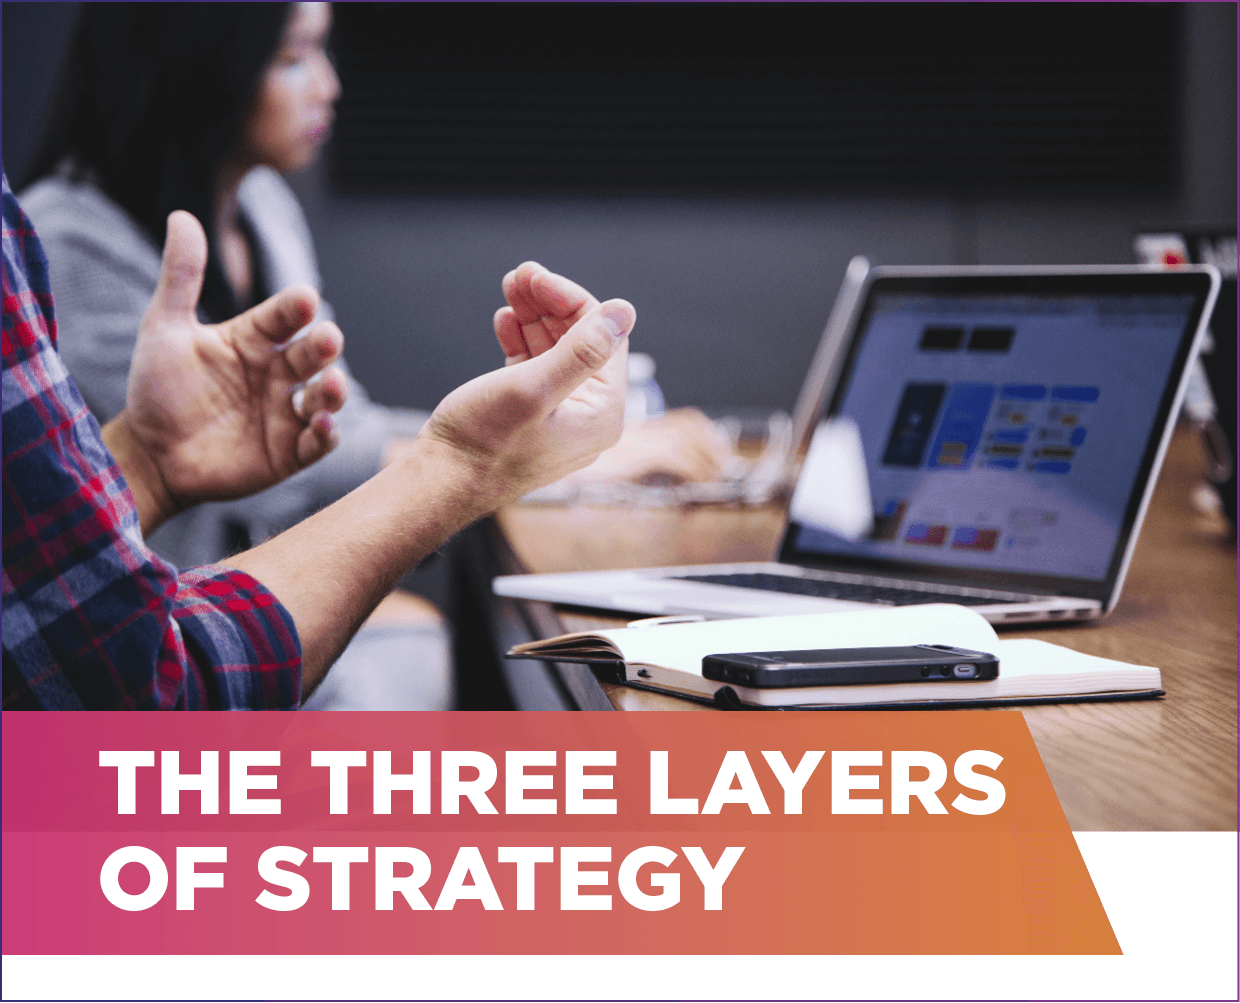 The three layers of strategy